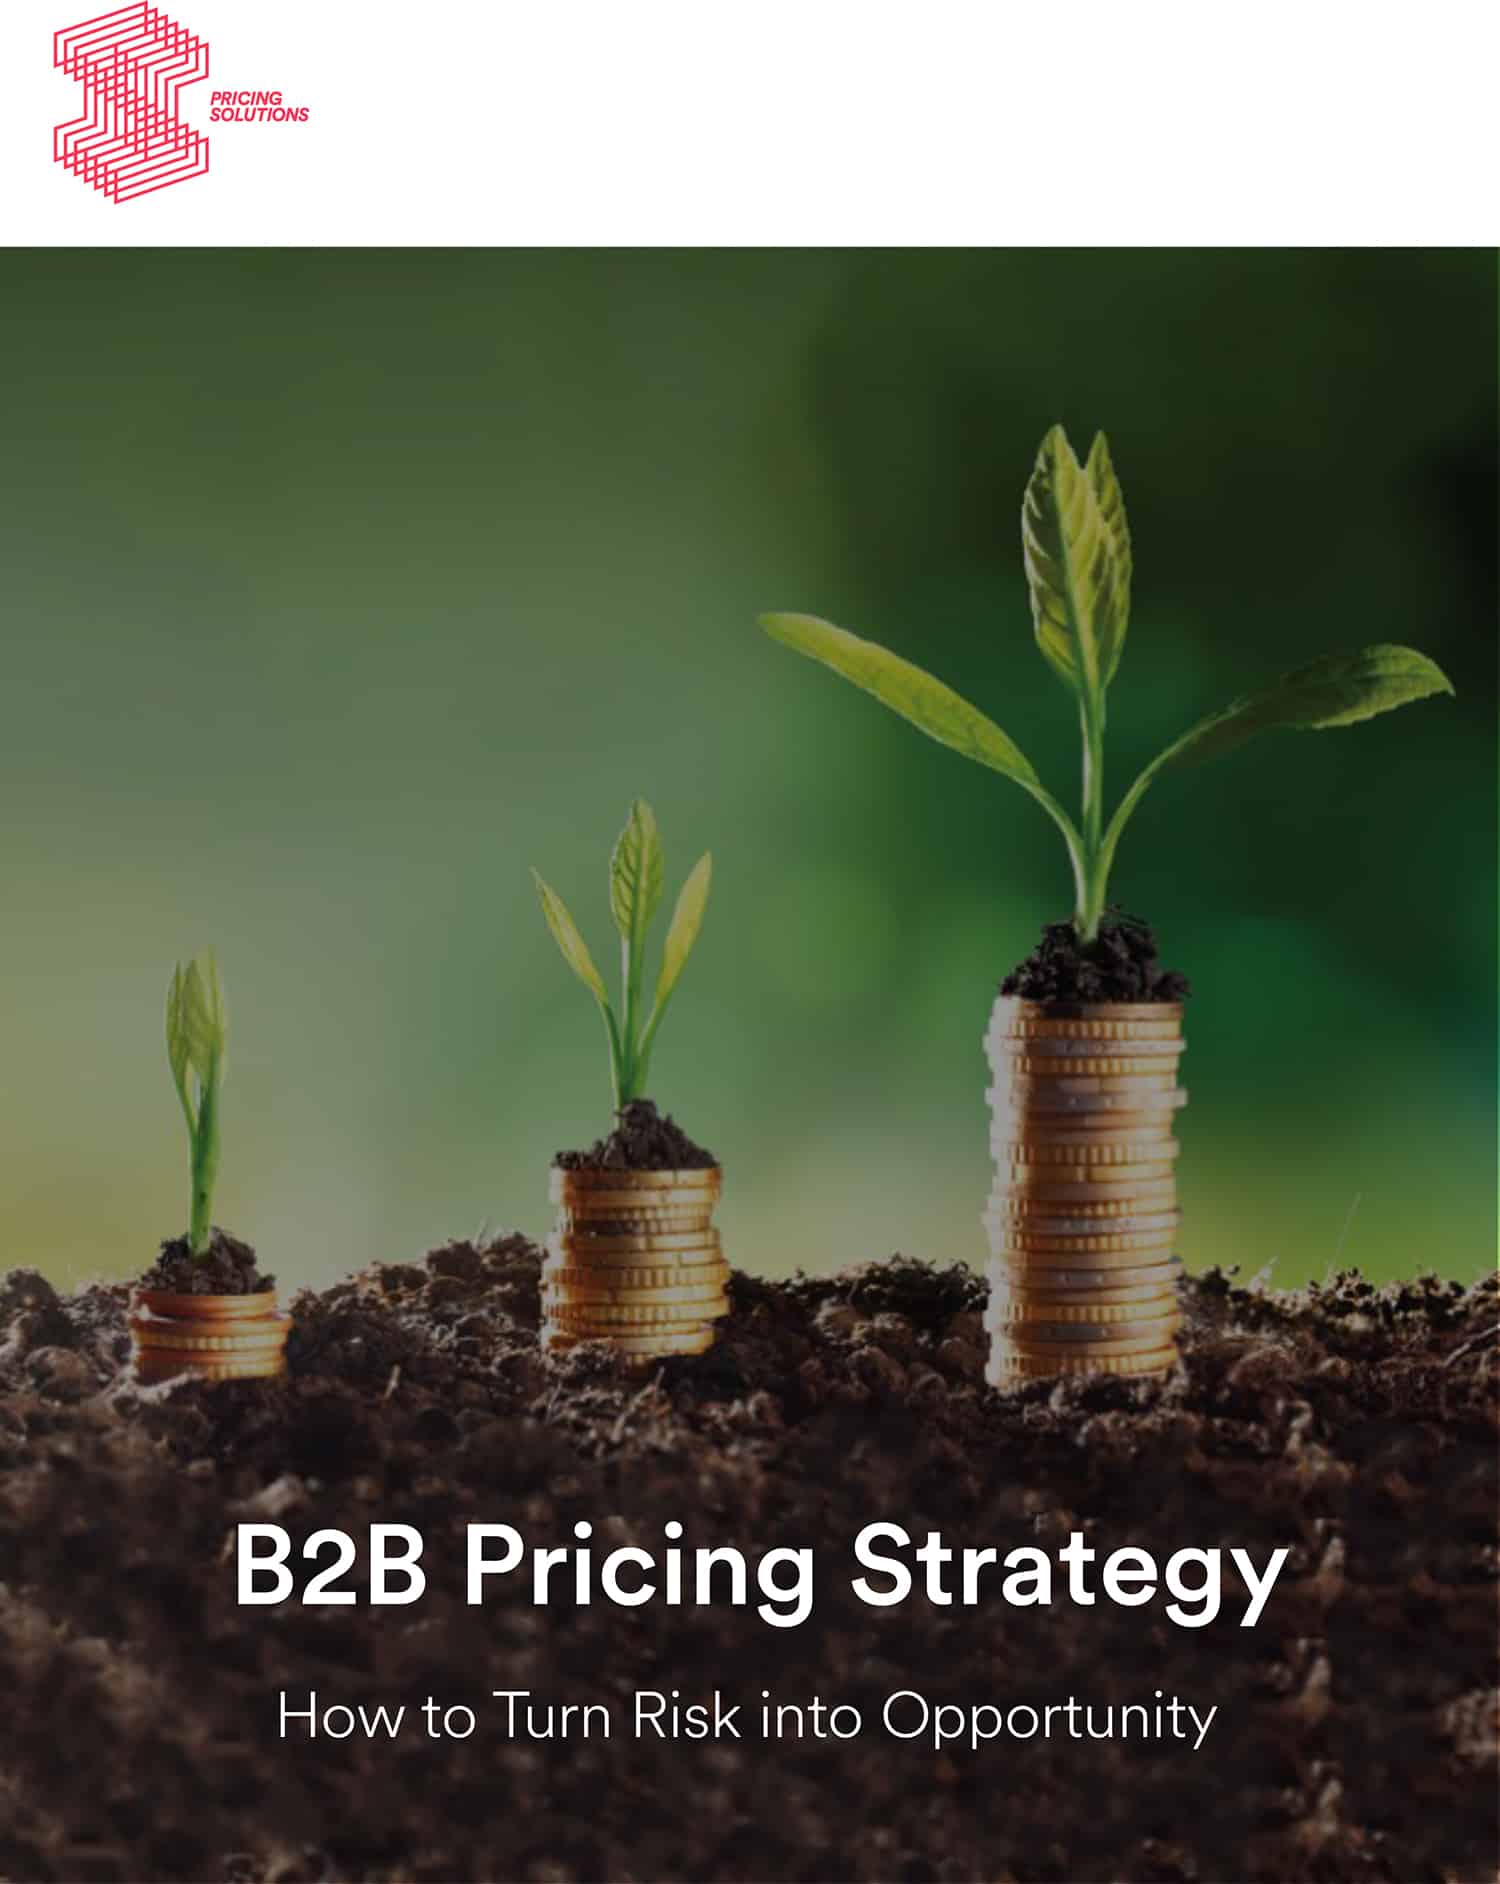 Pricing White Paper: Improving B2B Pricing Strategy